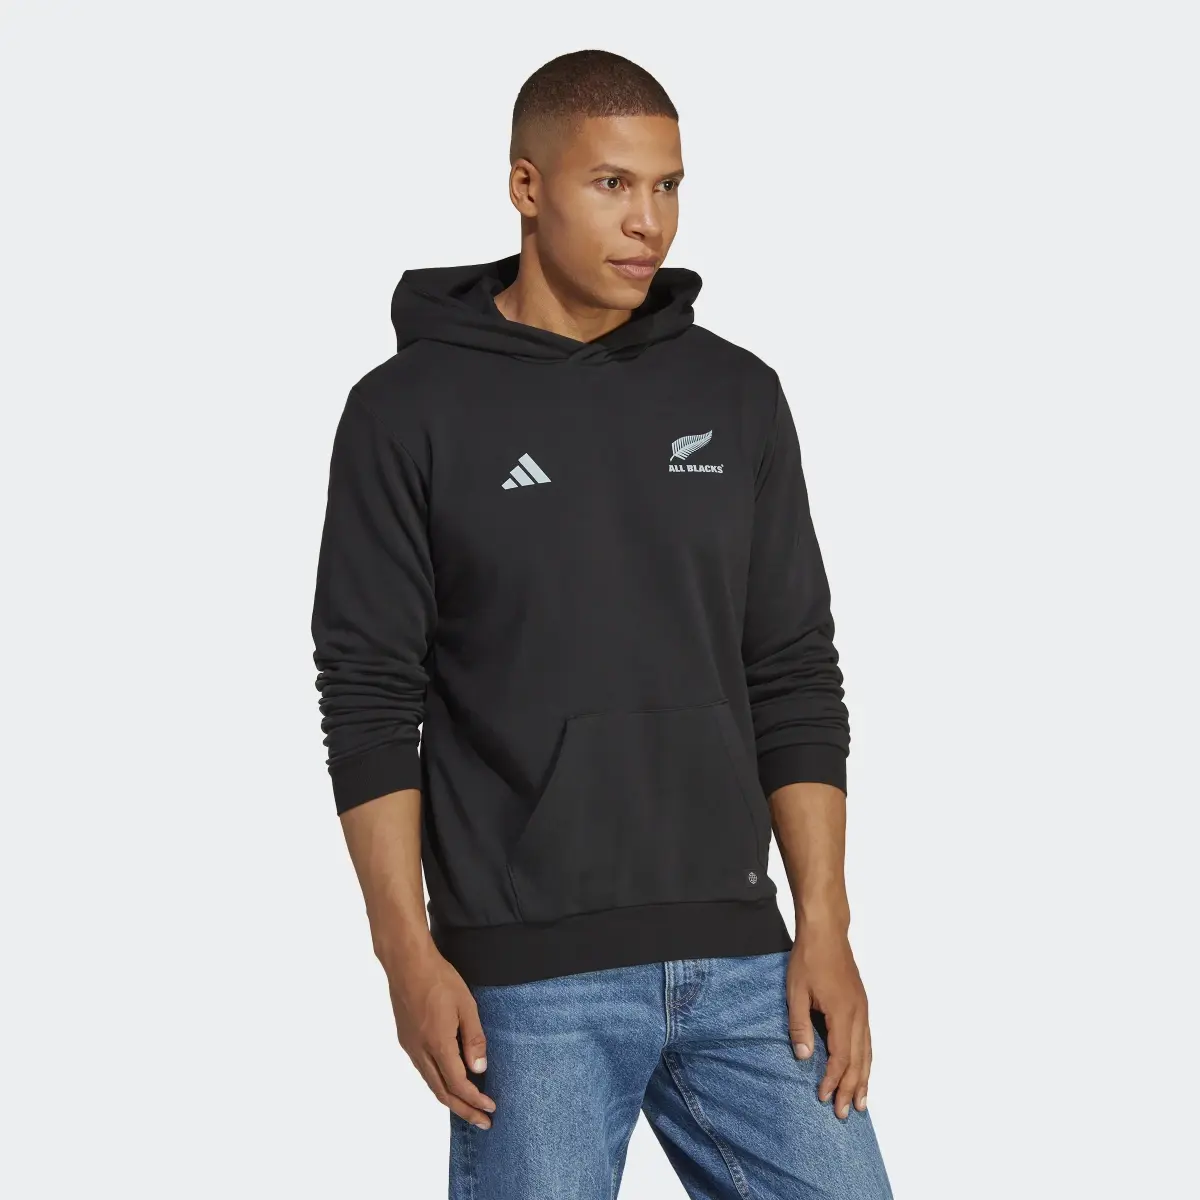 Adidas All Blacks Rugby Supporters Hoodie. 3